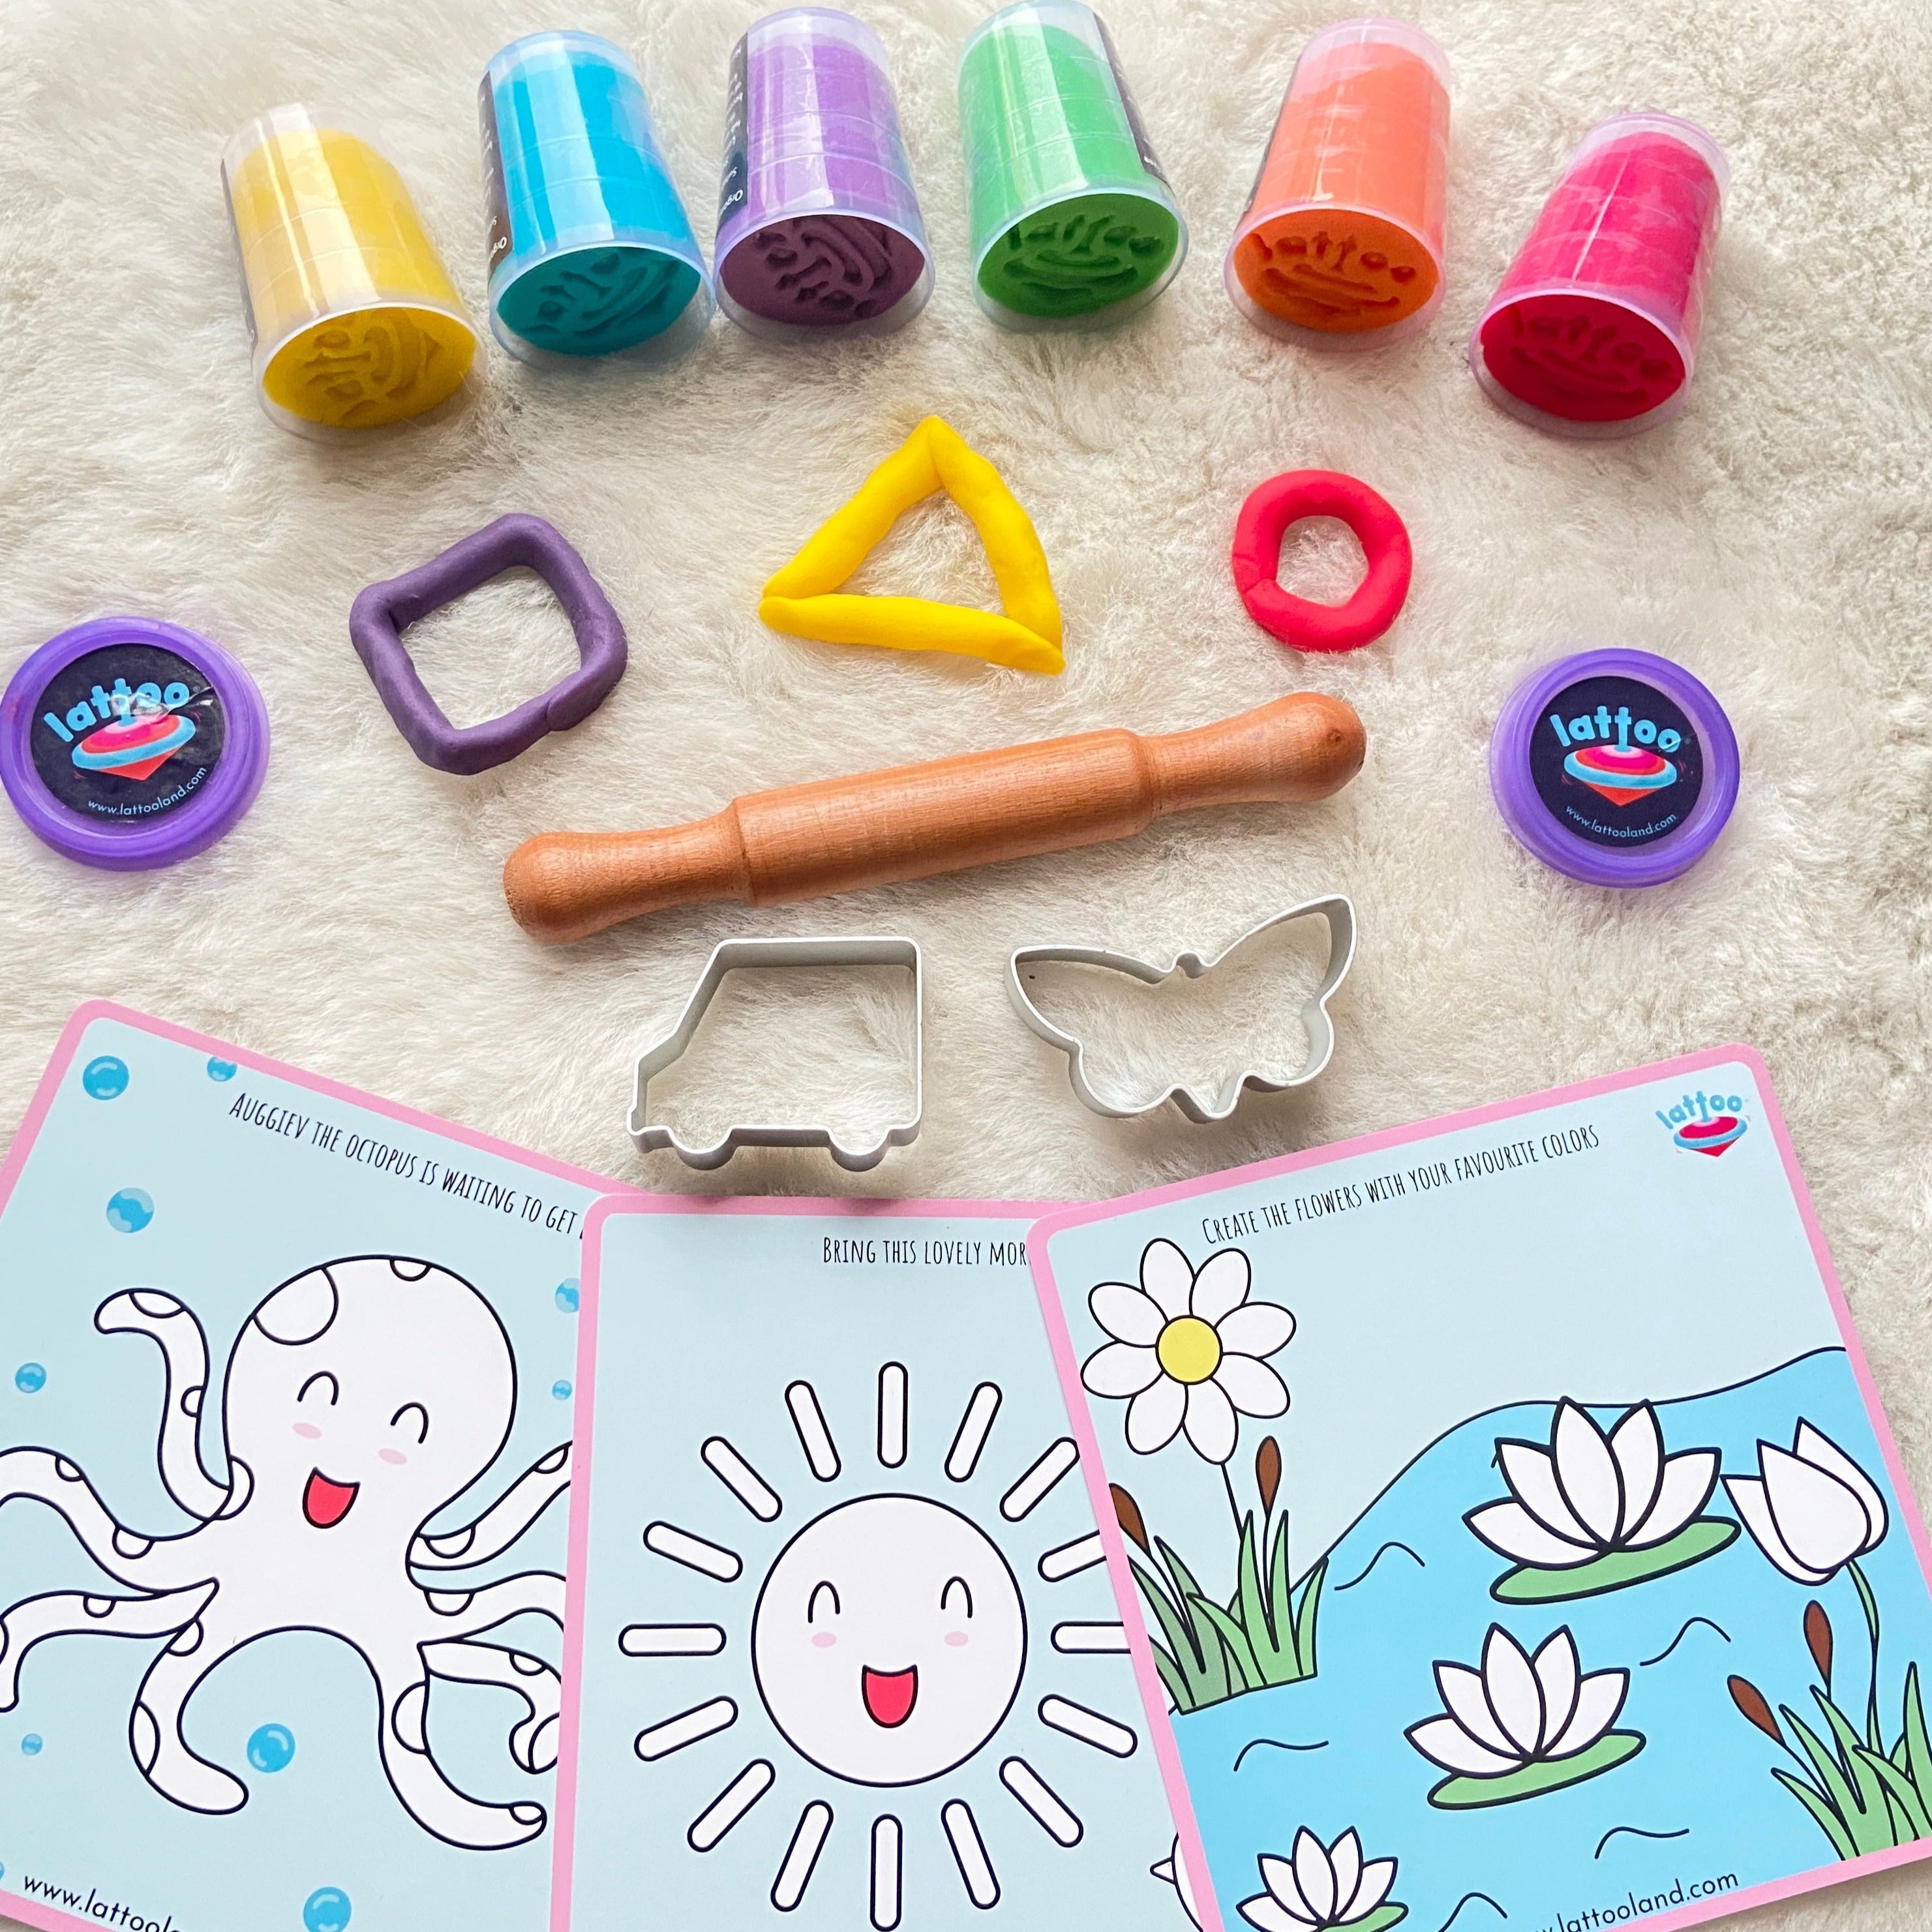 Clay dough set for fine motor skills - best gift for 3 year old girls and boys